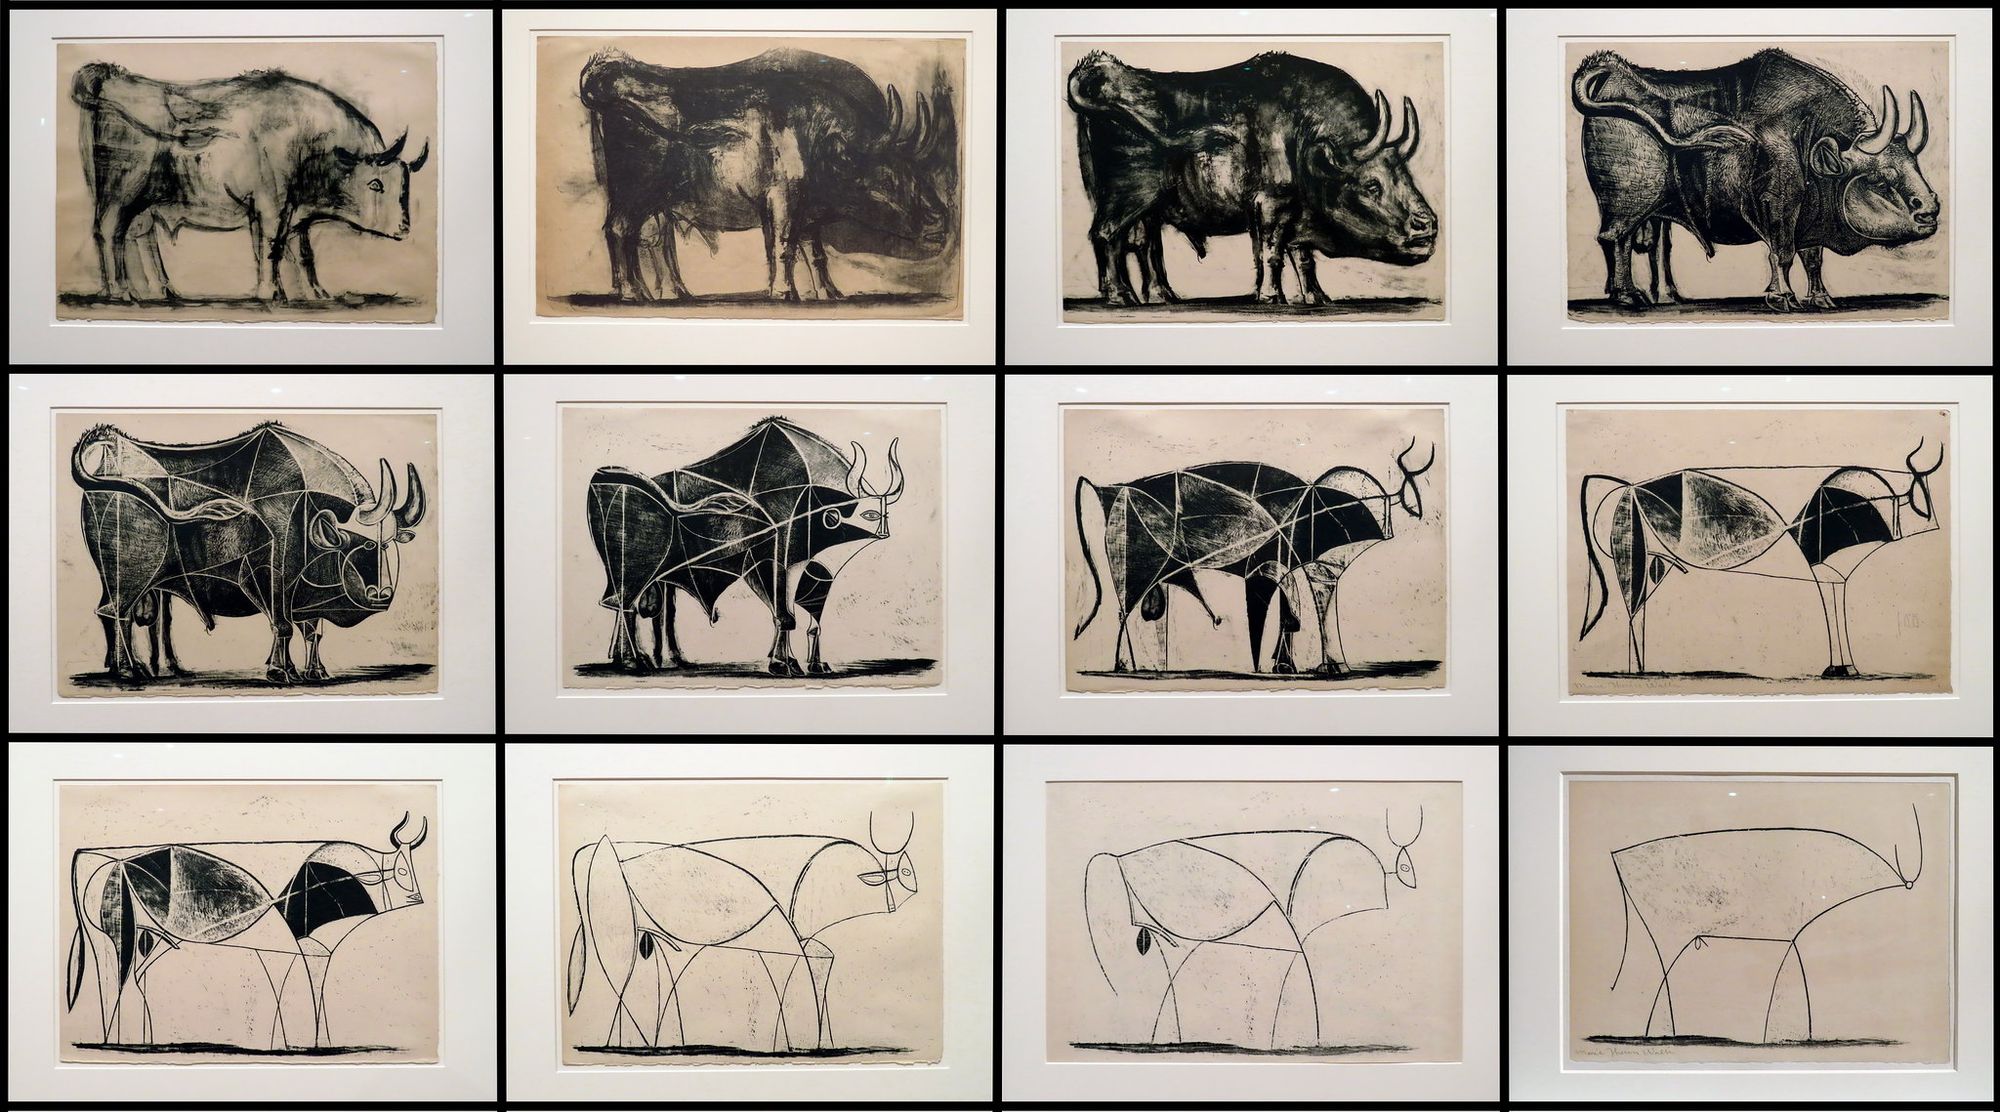 A series of bull drawings by Pablo Picasso